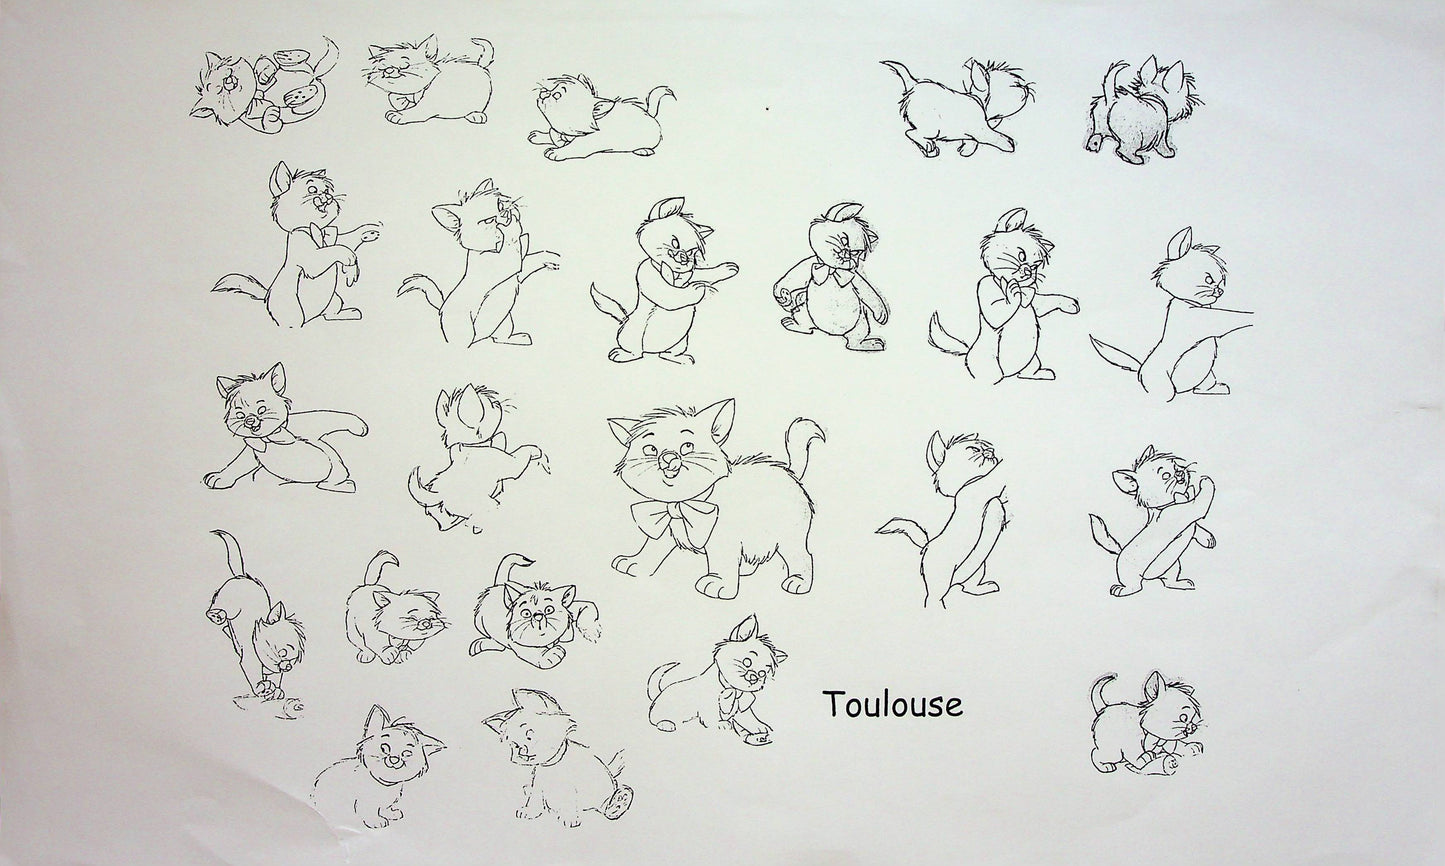 The Aristocats 1970 Production Animation Model Pencil Copy - Toulouse